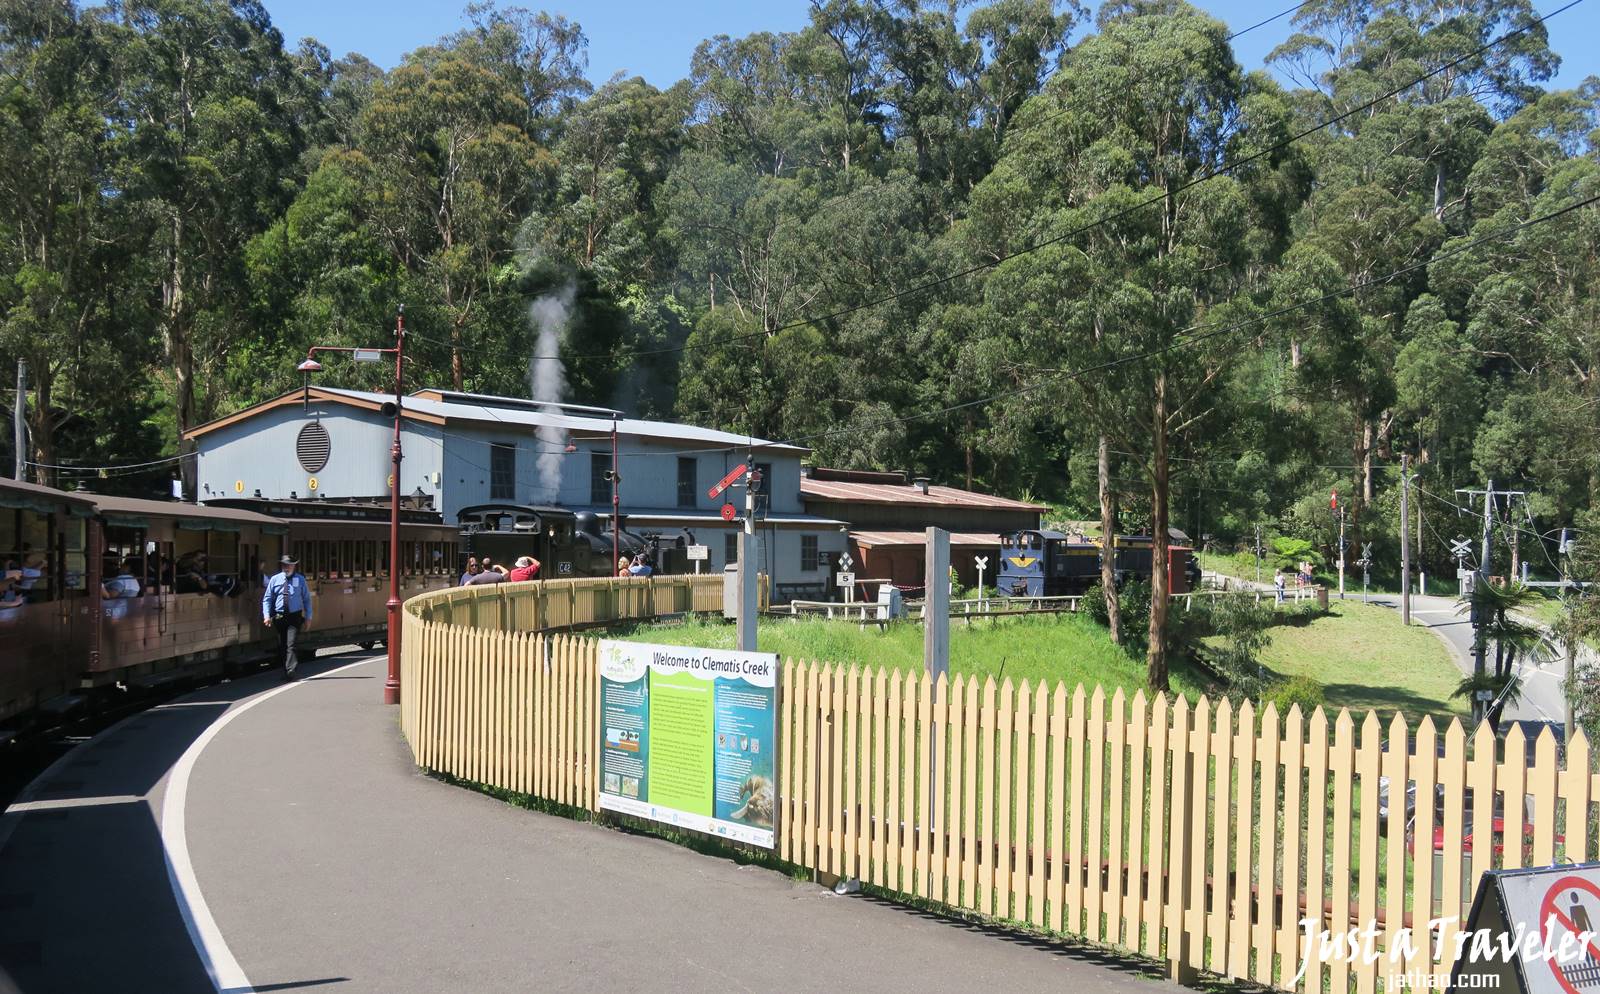 Melbourne-Puffing Billy Steam Train-Puffing Billy Railway-Fare-Boarding-Attractions-Recommendation-Independent Travel-Day Tour-Half Day Tour-Itinerary